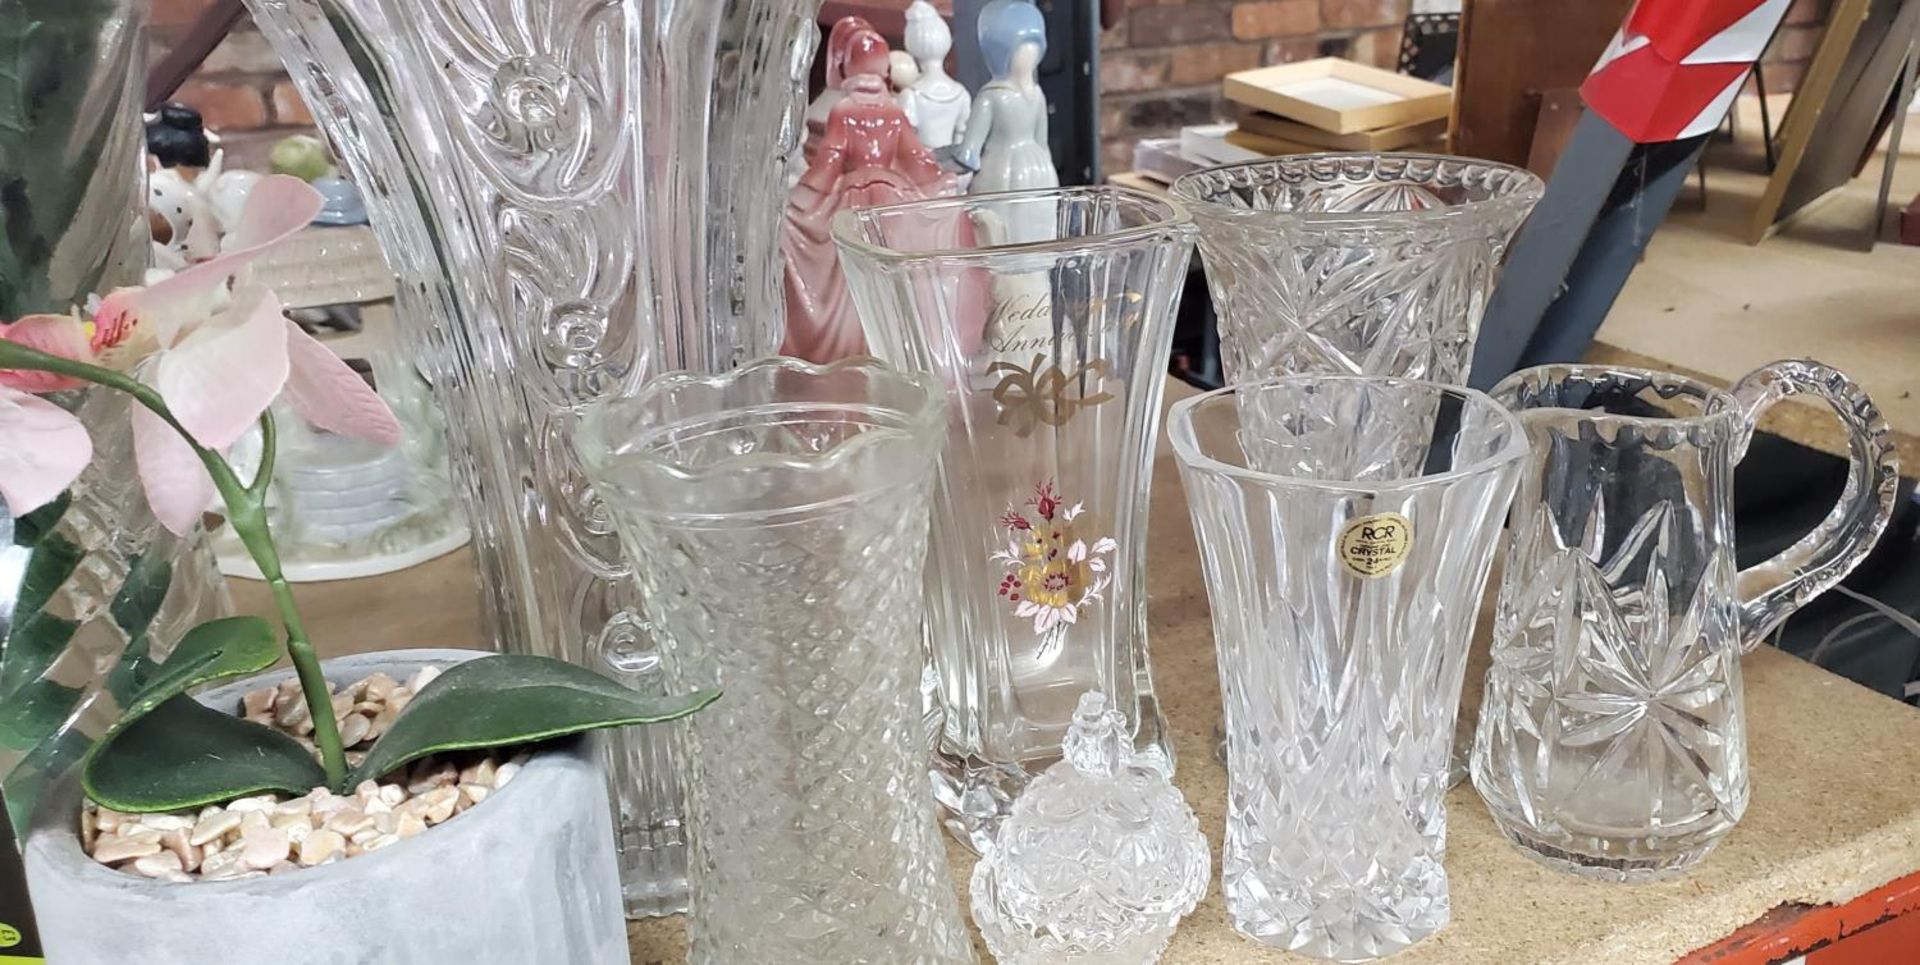 A QUANTITY OF GLASSWARE TO INCLUDE VASES, JUGS, BOWLS, A CAKE STAND, ETC PLUS ARTIFICIAL FLOWERS - Image 2 of 3